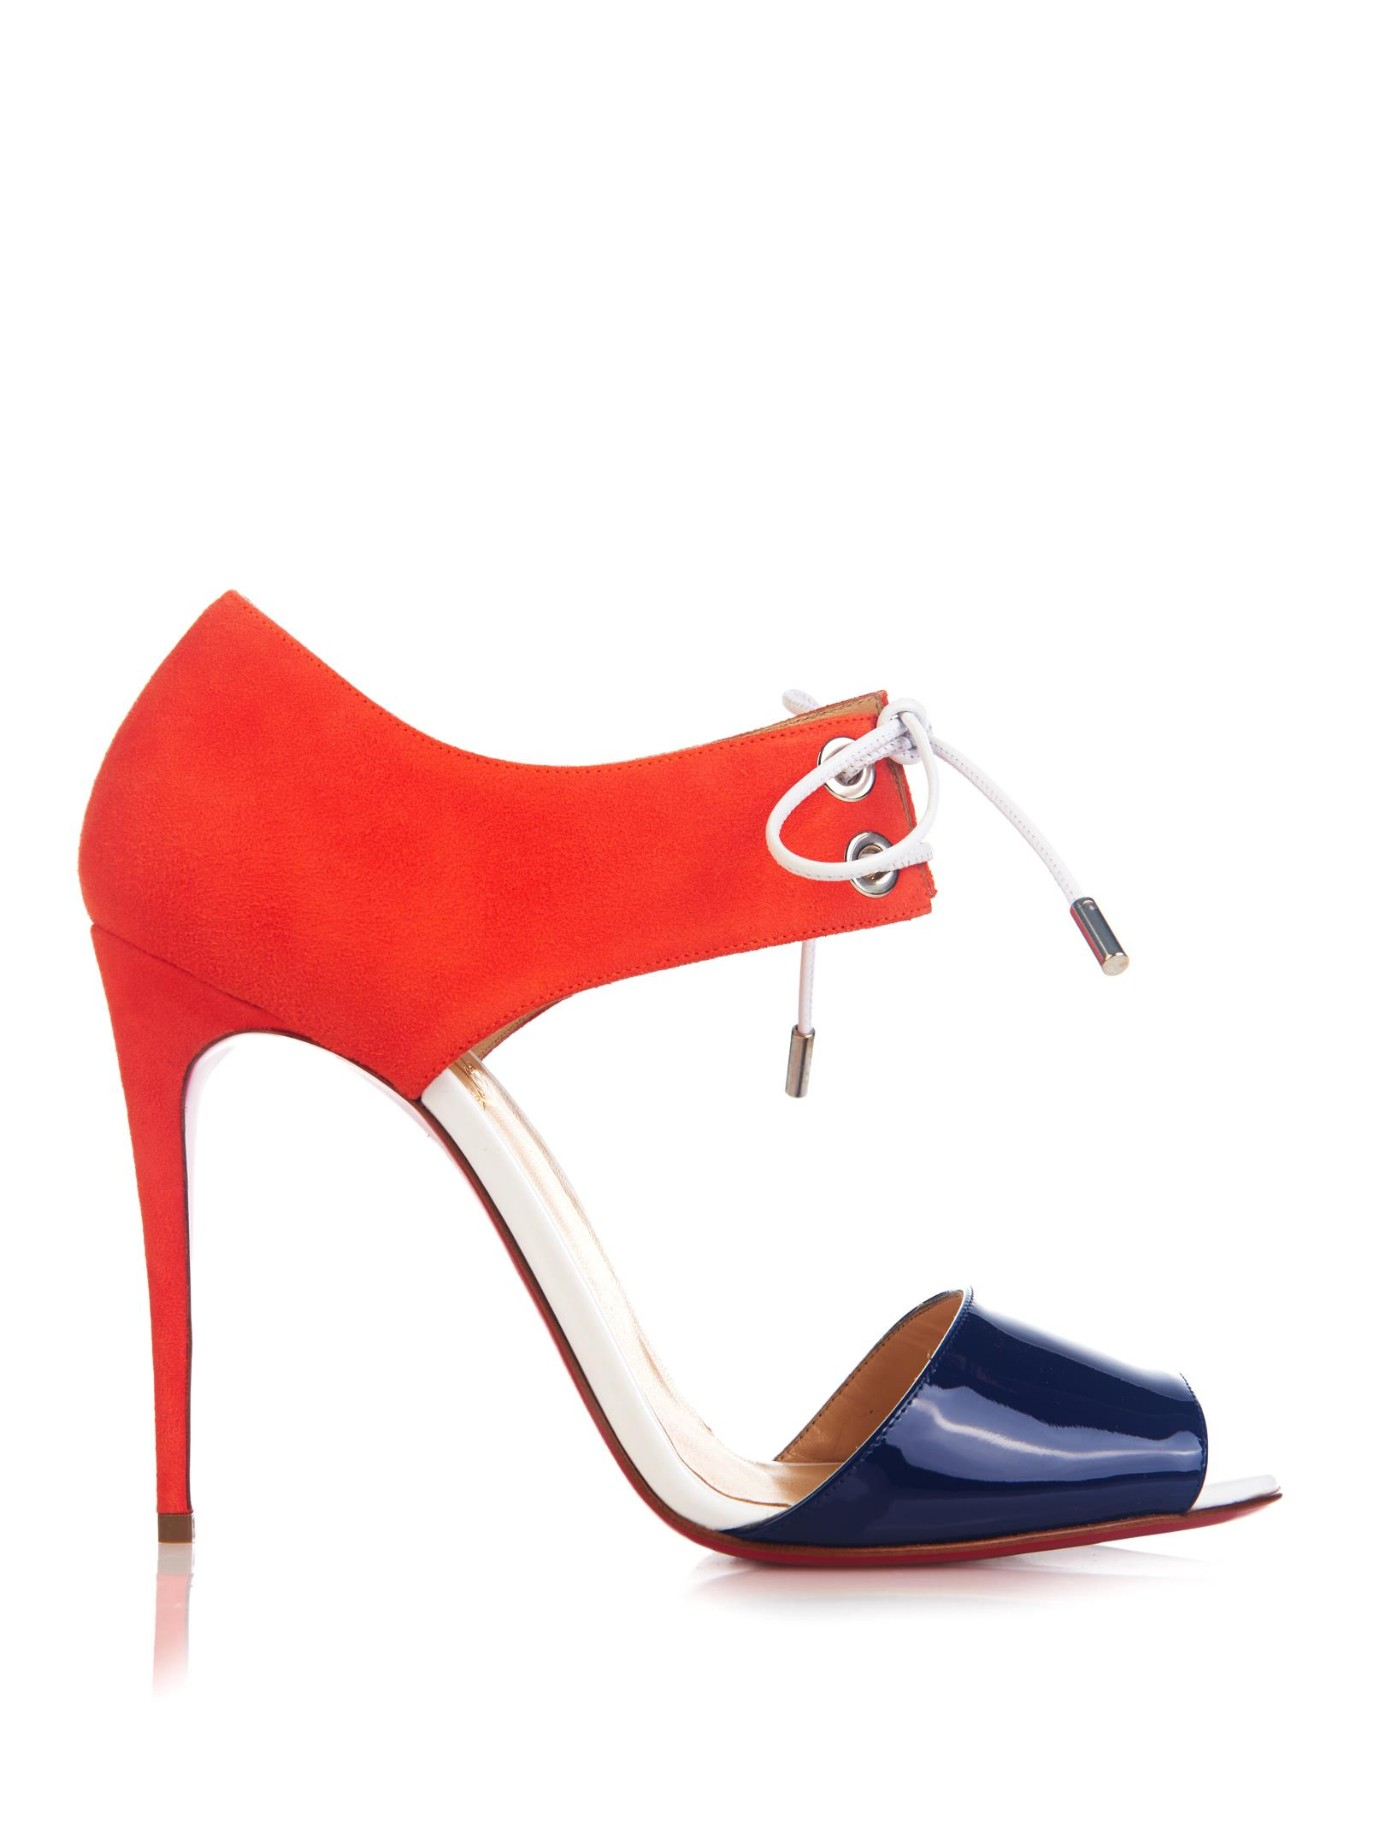 Christian louboutin Mayerling Patent Leather and Suede Sandals in Blue ...